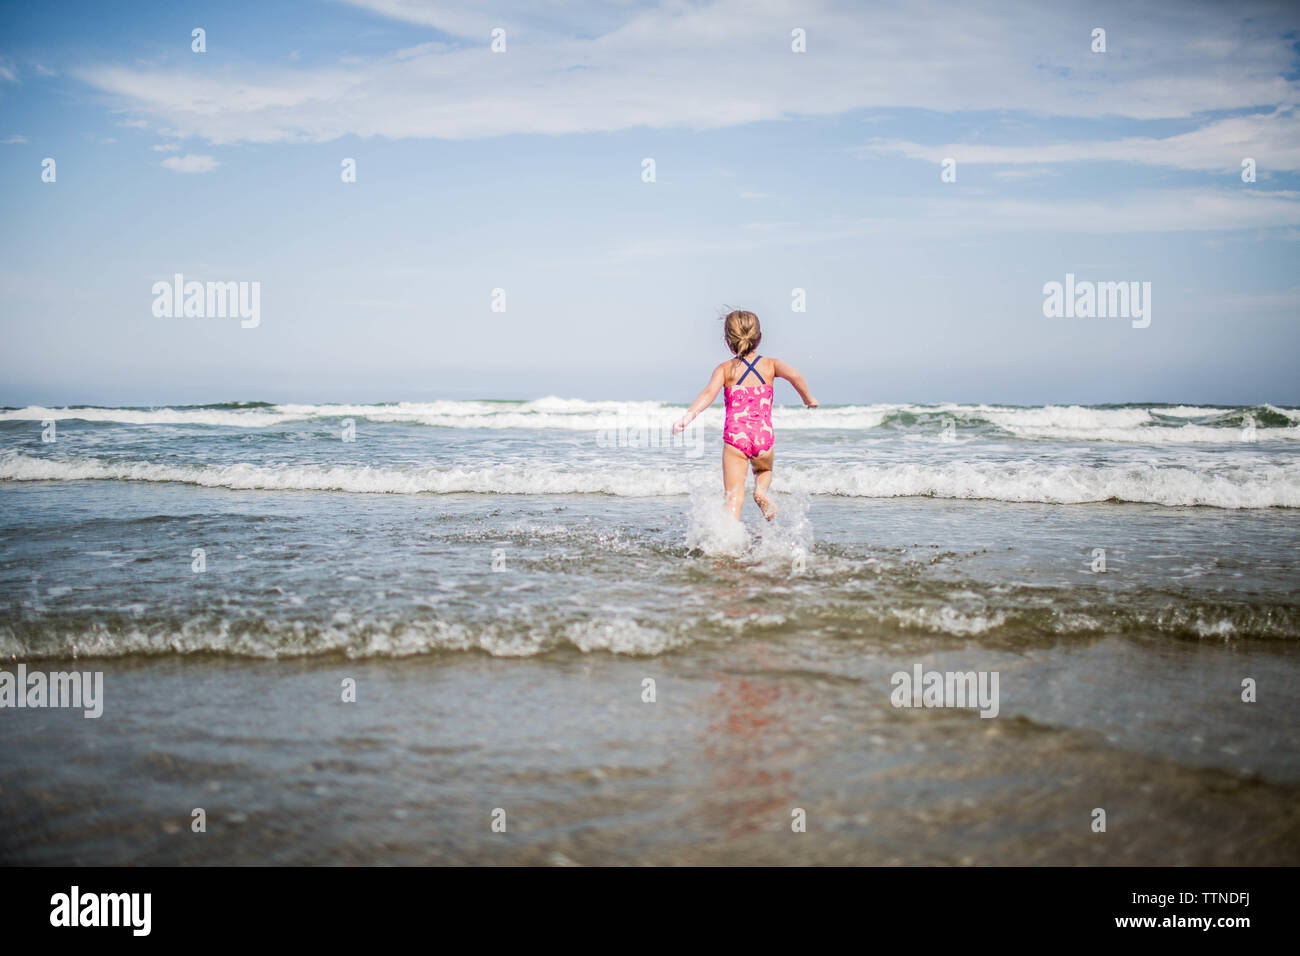 5 year old girl running into ocean waves Stock Photo